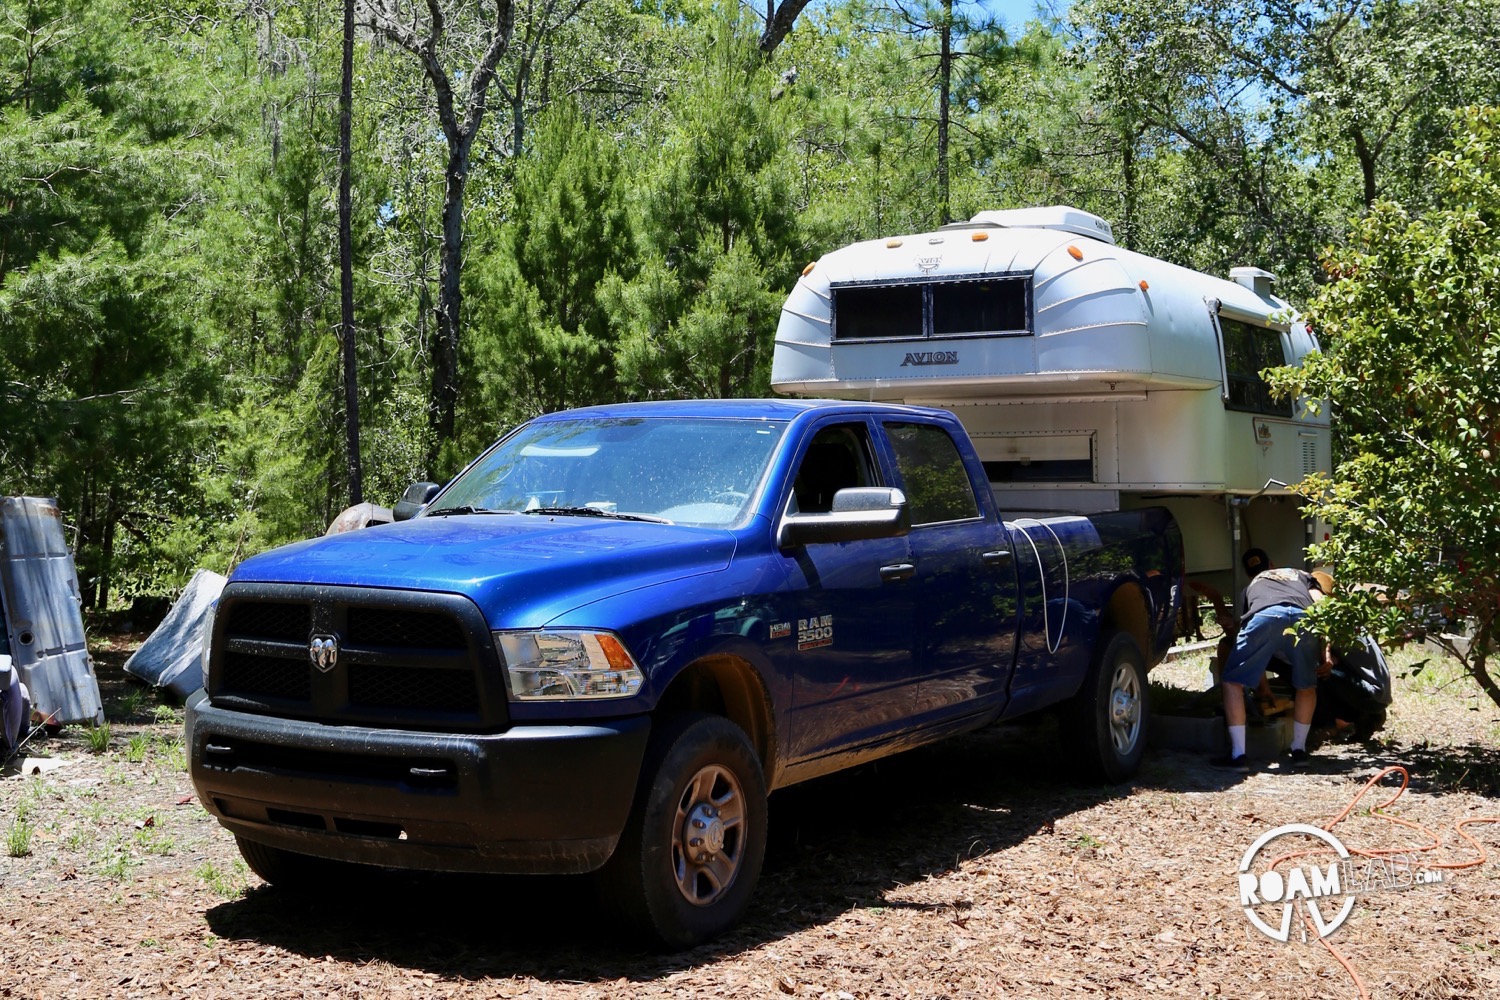 1970 Avion C11 truck camper on jacks in the previous owners back yard with out 2015 Ram 3500.